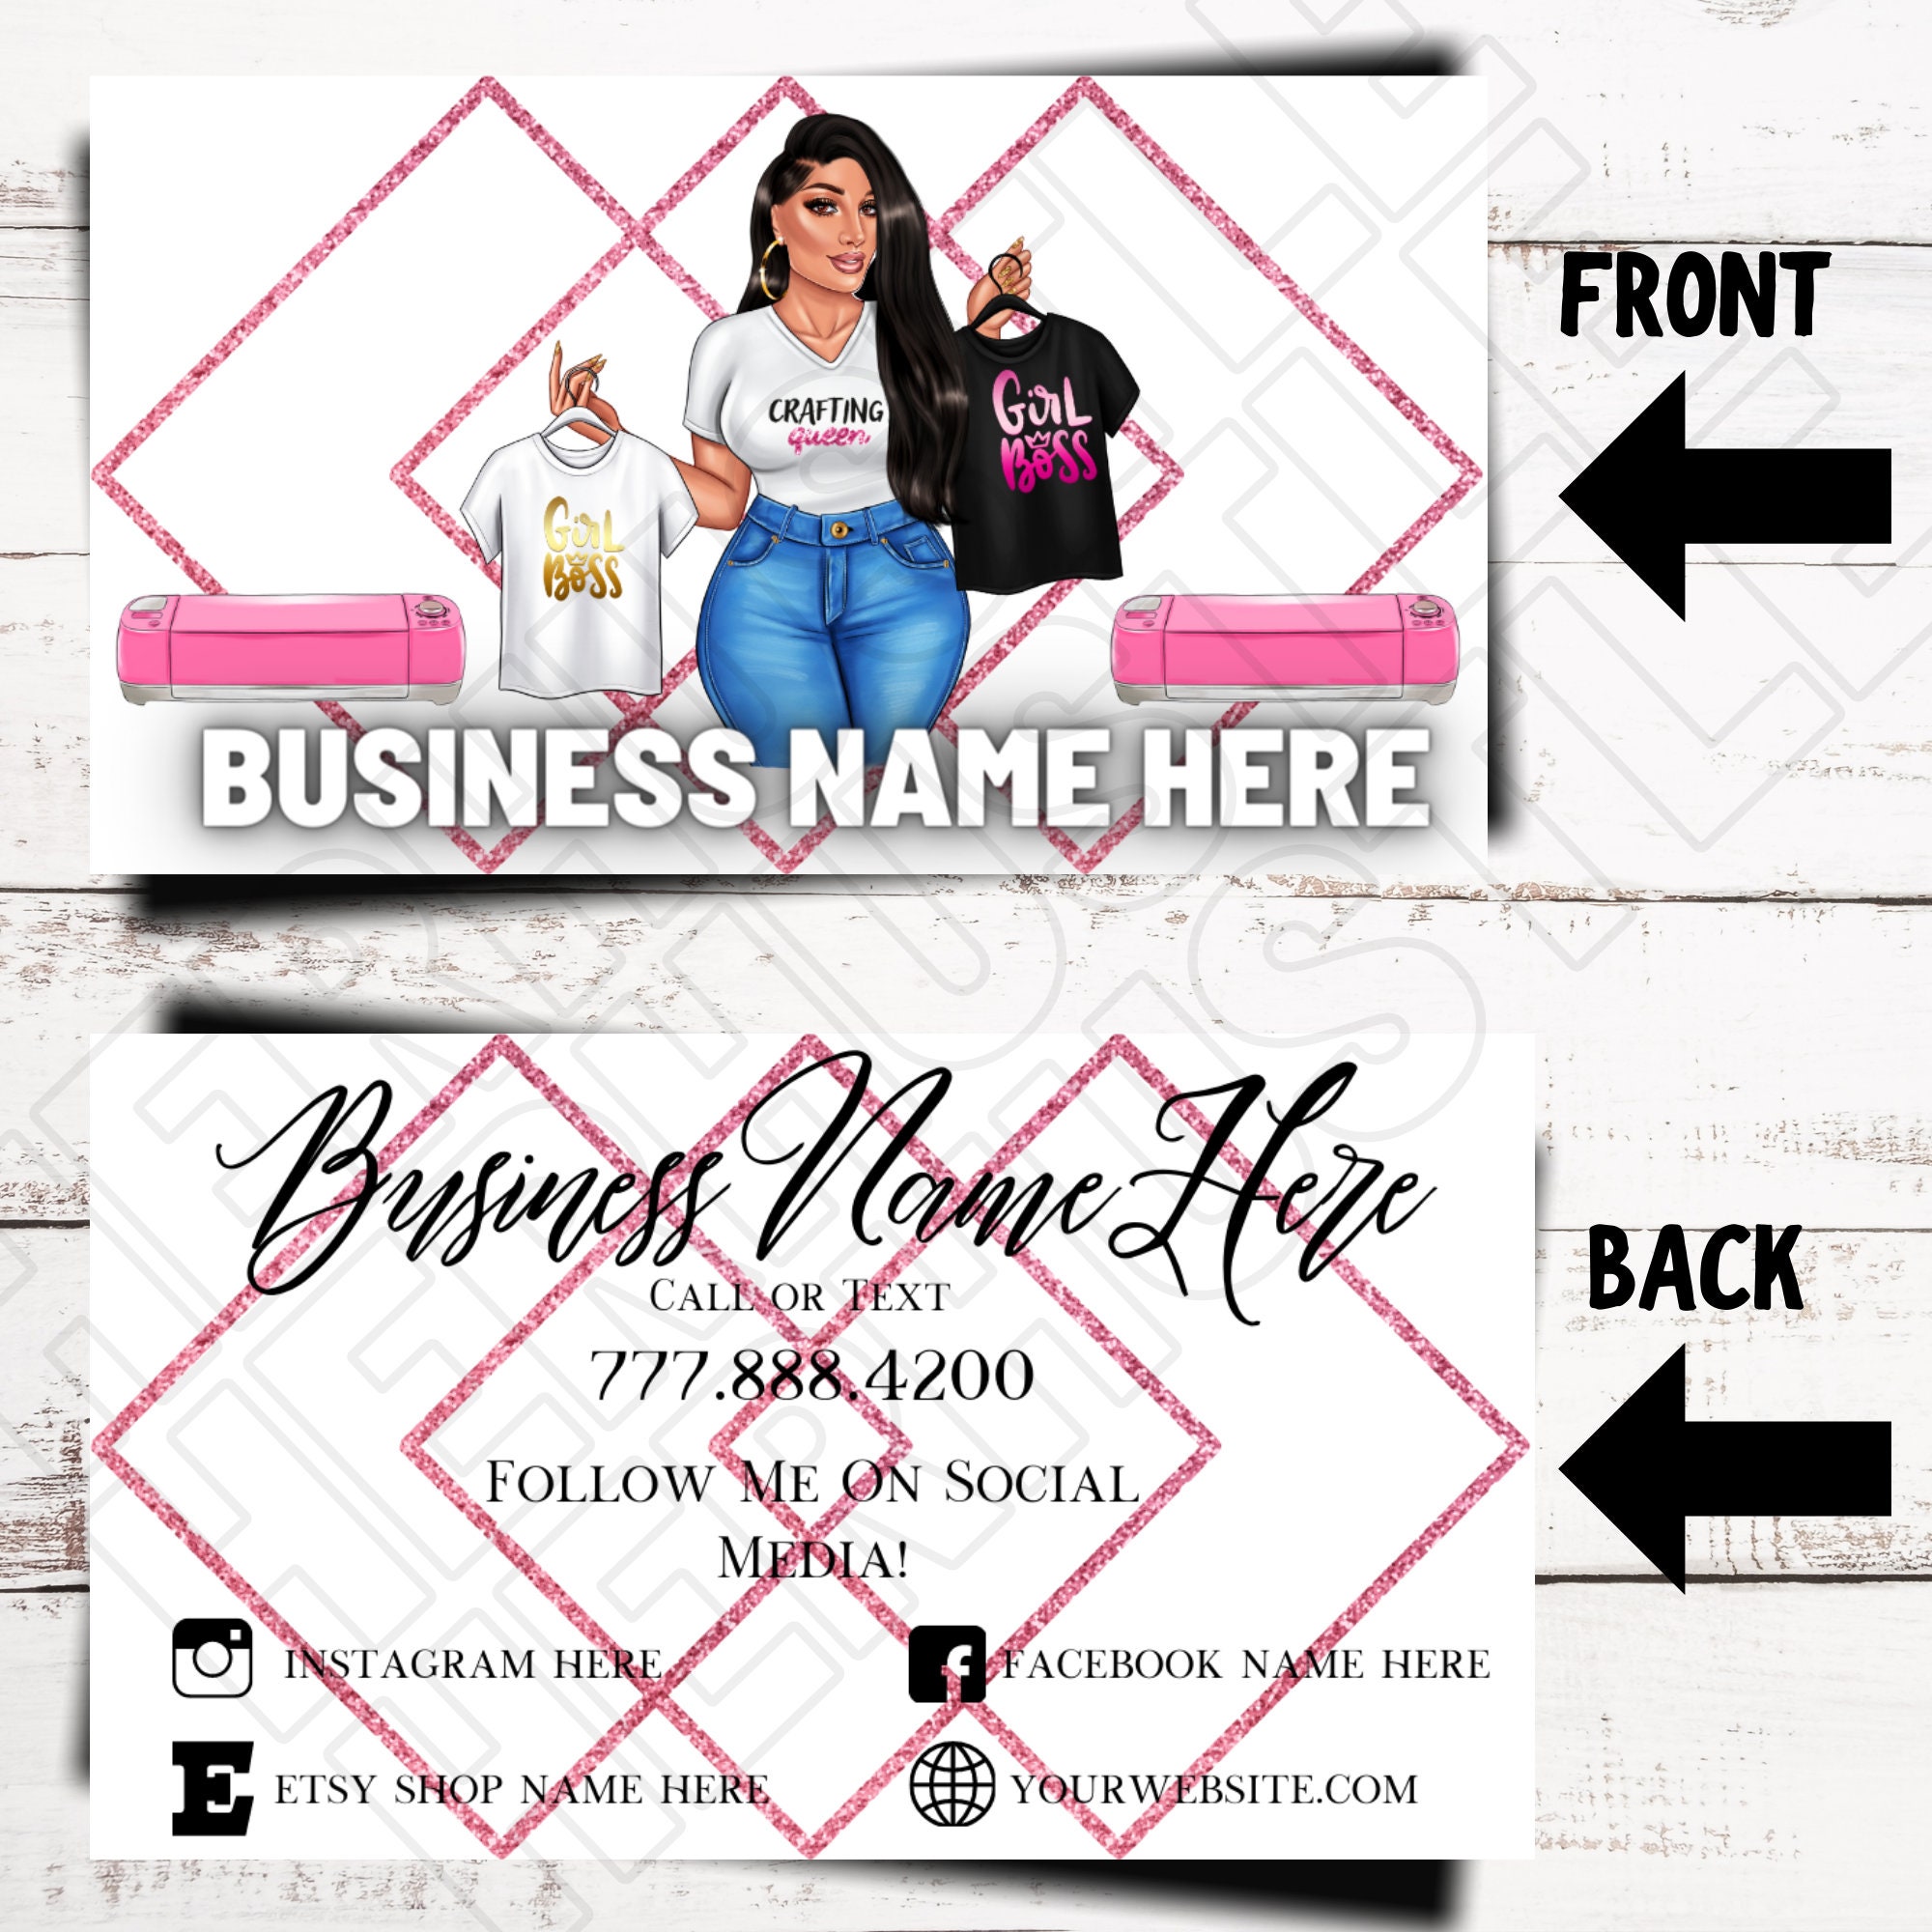 business cards for crafters 1